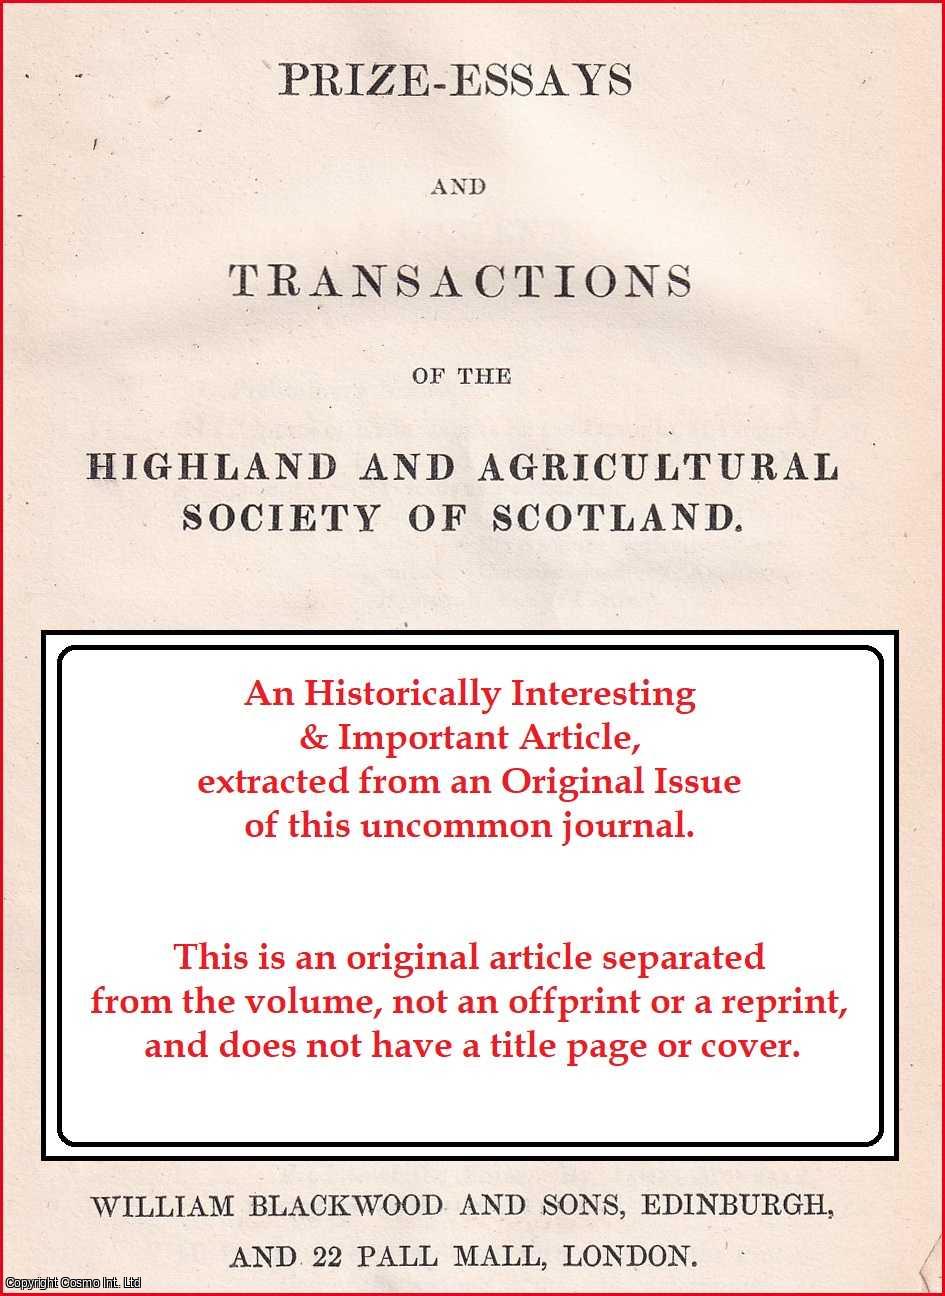 Mr. John Cuninghame, Dolphingston, near Tranent. - The Cultivation of Lucern (Medicago sativa). An uncommon original article from the Prize Essays and Transactions of the Highland Society of Scotland, 1831.